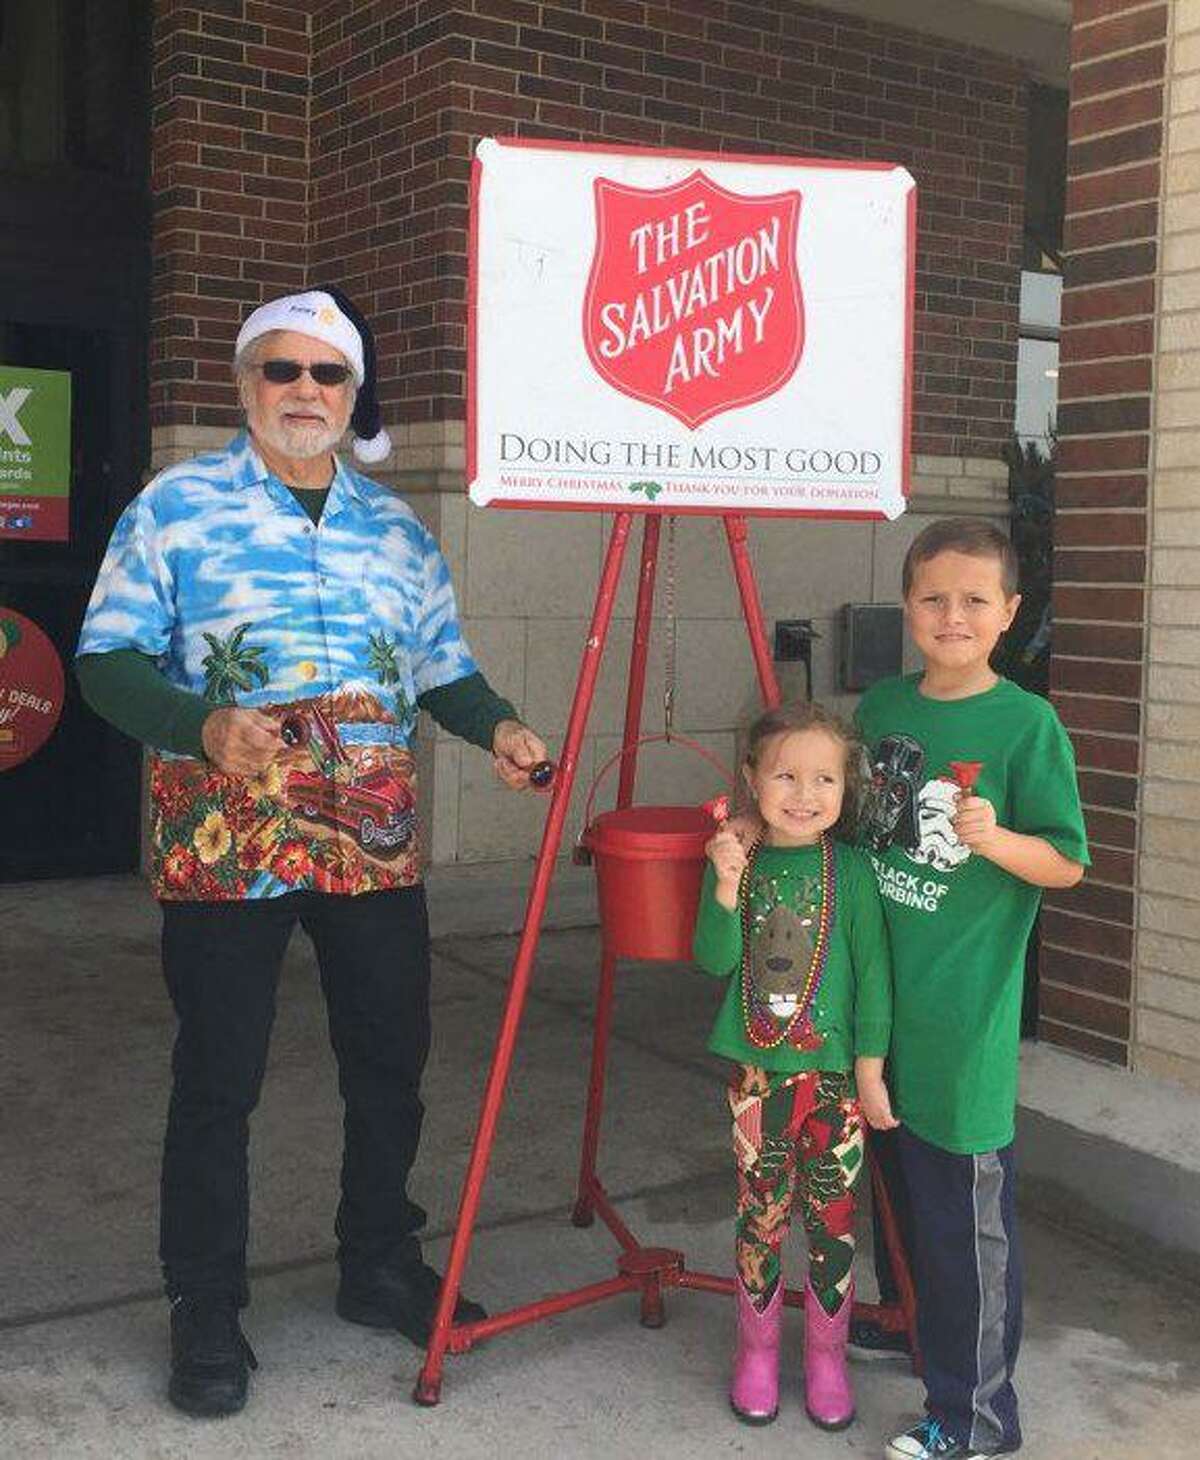 Pictured are Michael McBride with Annie and Henry Hernandez ringing the bell for the Salvation Army at a Kroger's as a part of the Rotary Club of Conroe. Rotary bell ringers will be out again on Saturday in front of the Kroger's on the South Loop.